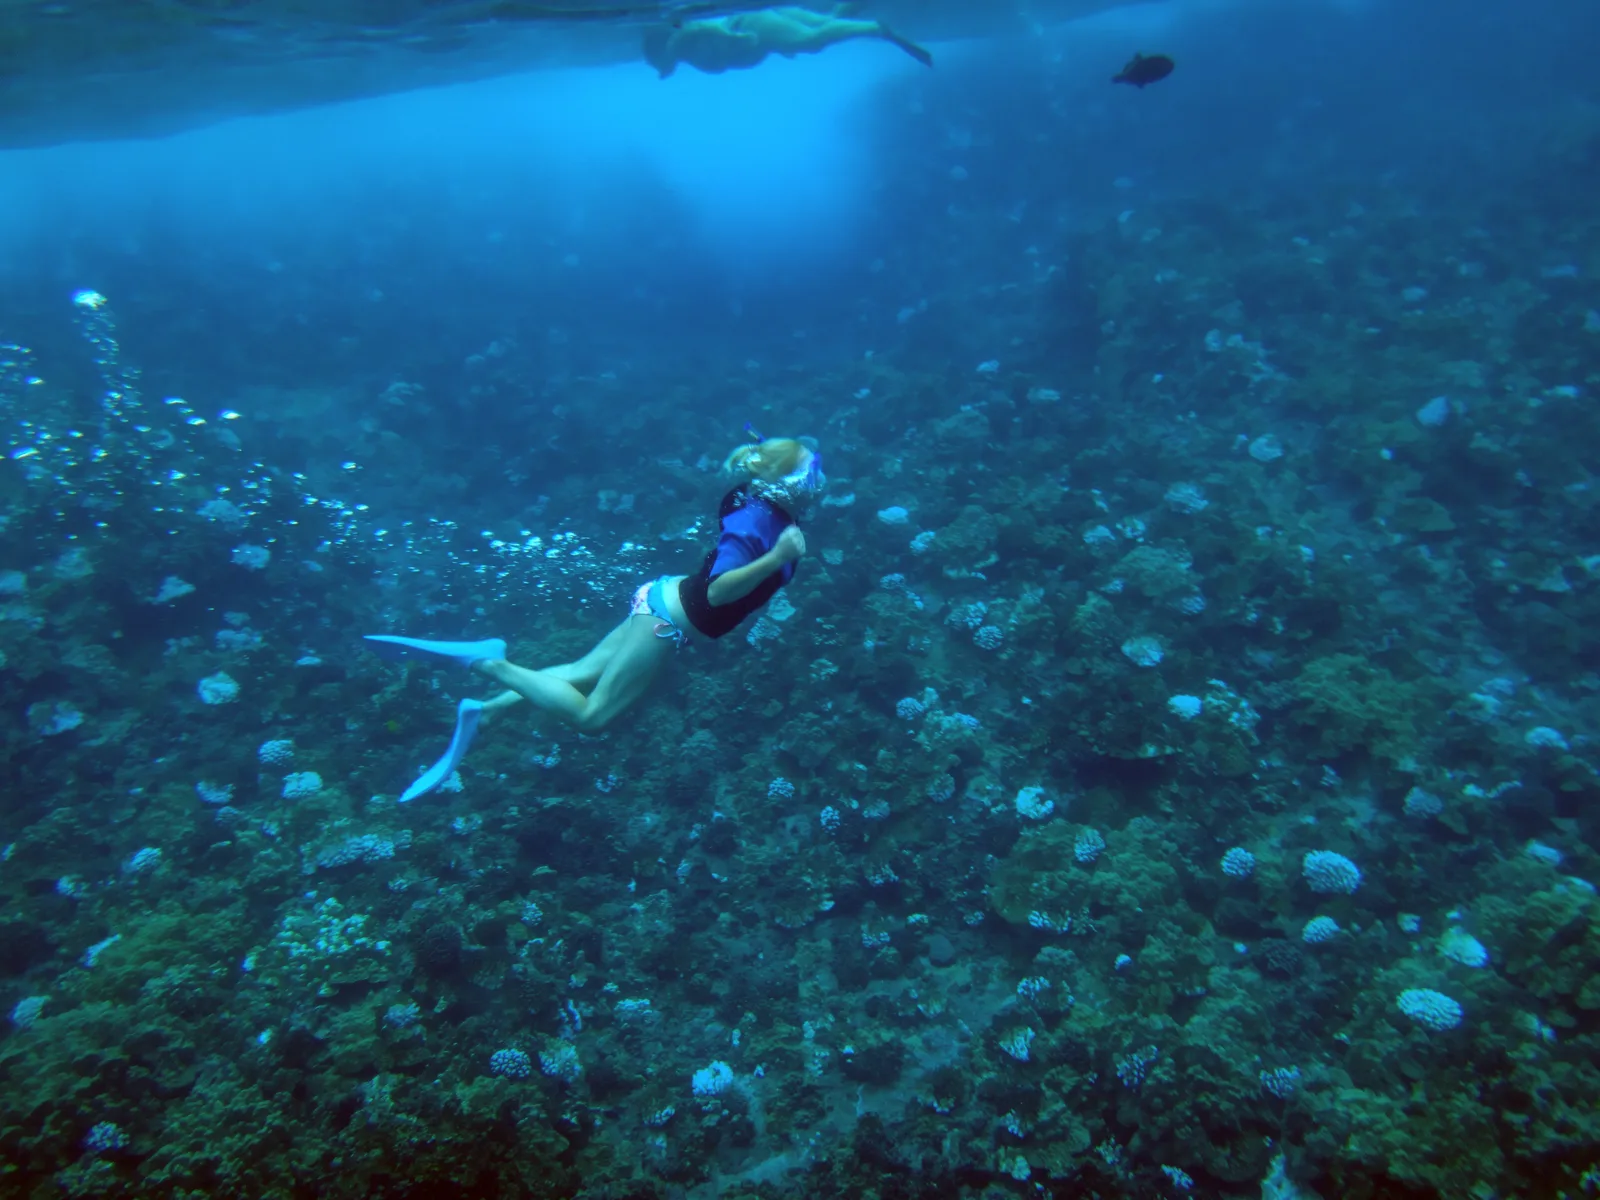 Two people snorkeling at the translucent waters at Molokini Crater where coral reefs are flourishing at the seabed making it one of the best snorkeling spots in Hawaii